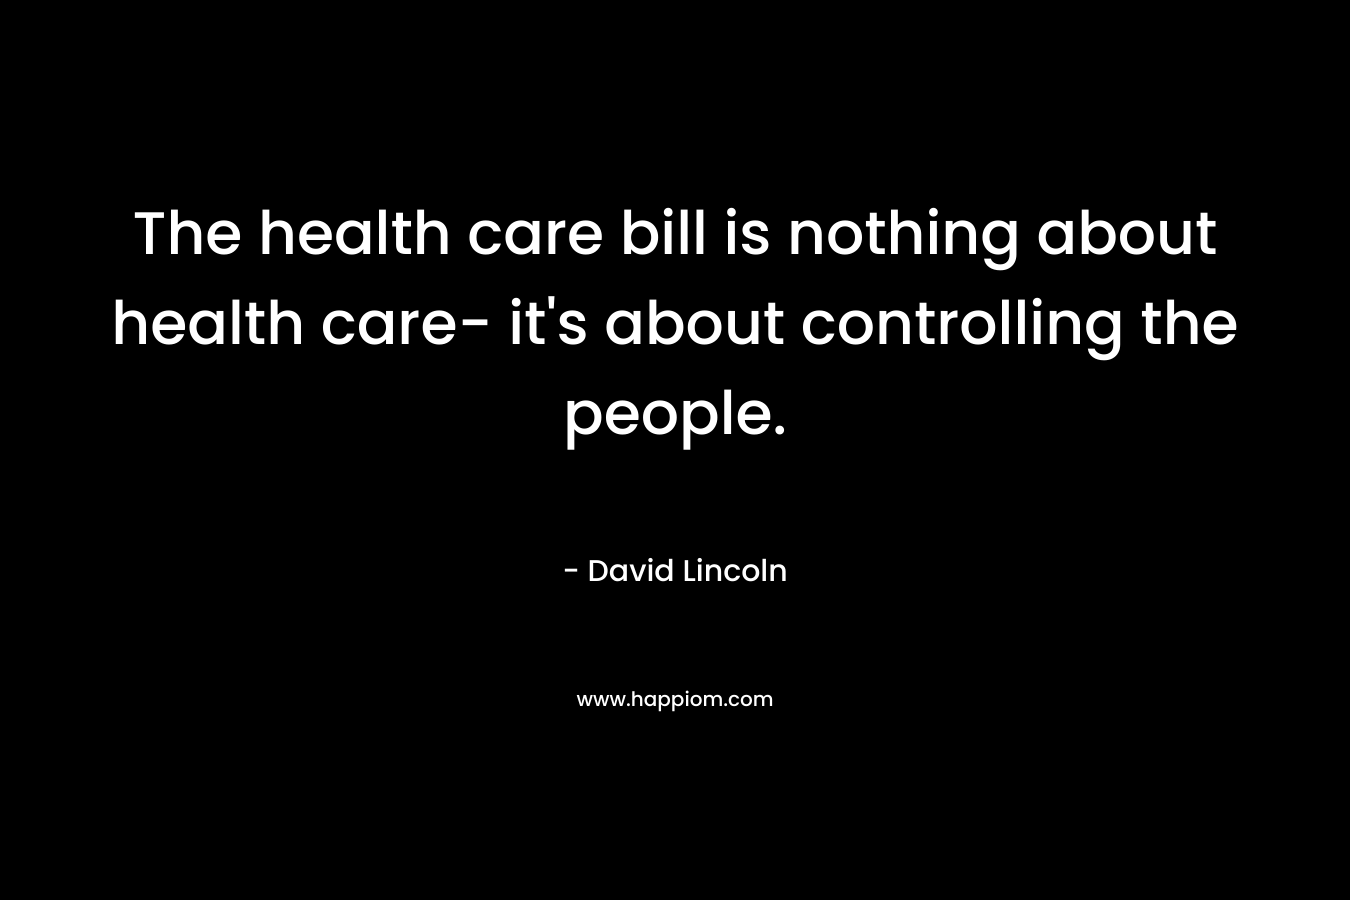 The health care bill is nothing about health care- it's about controlling the people.